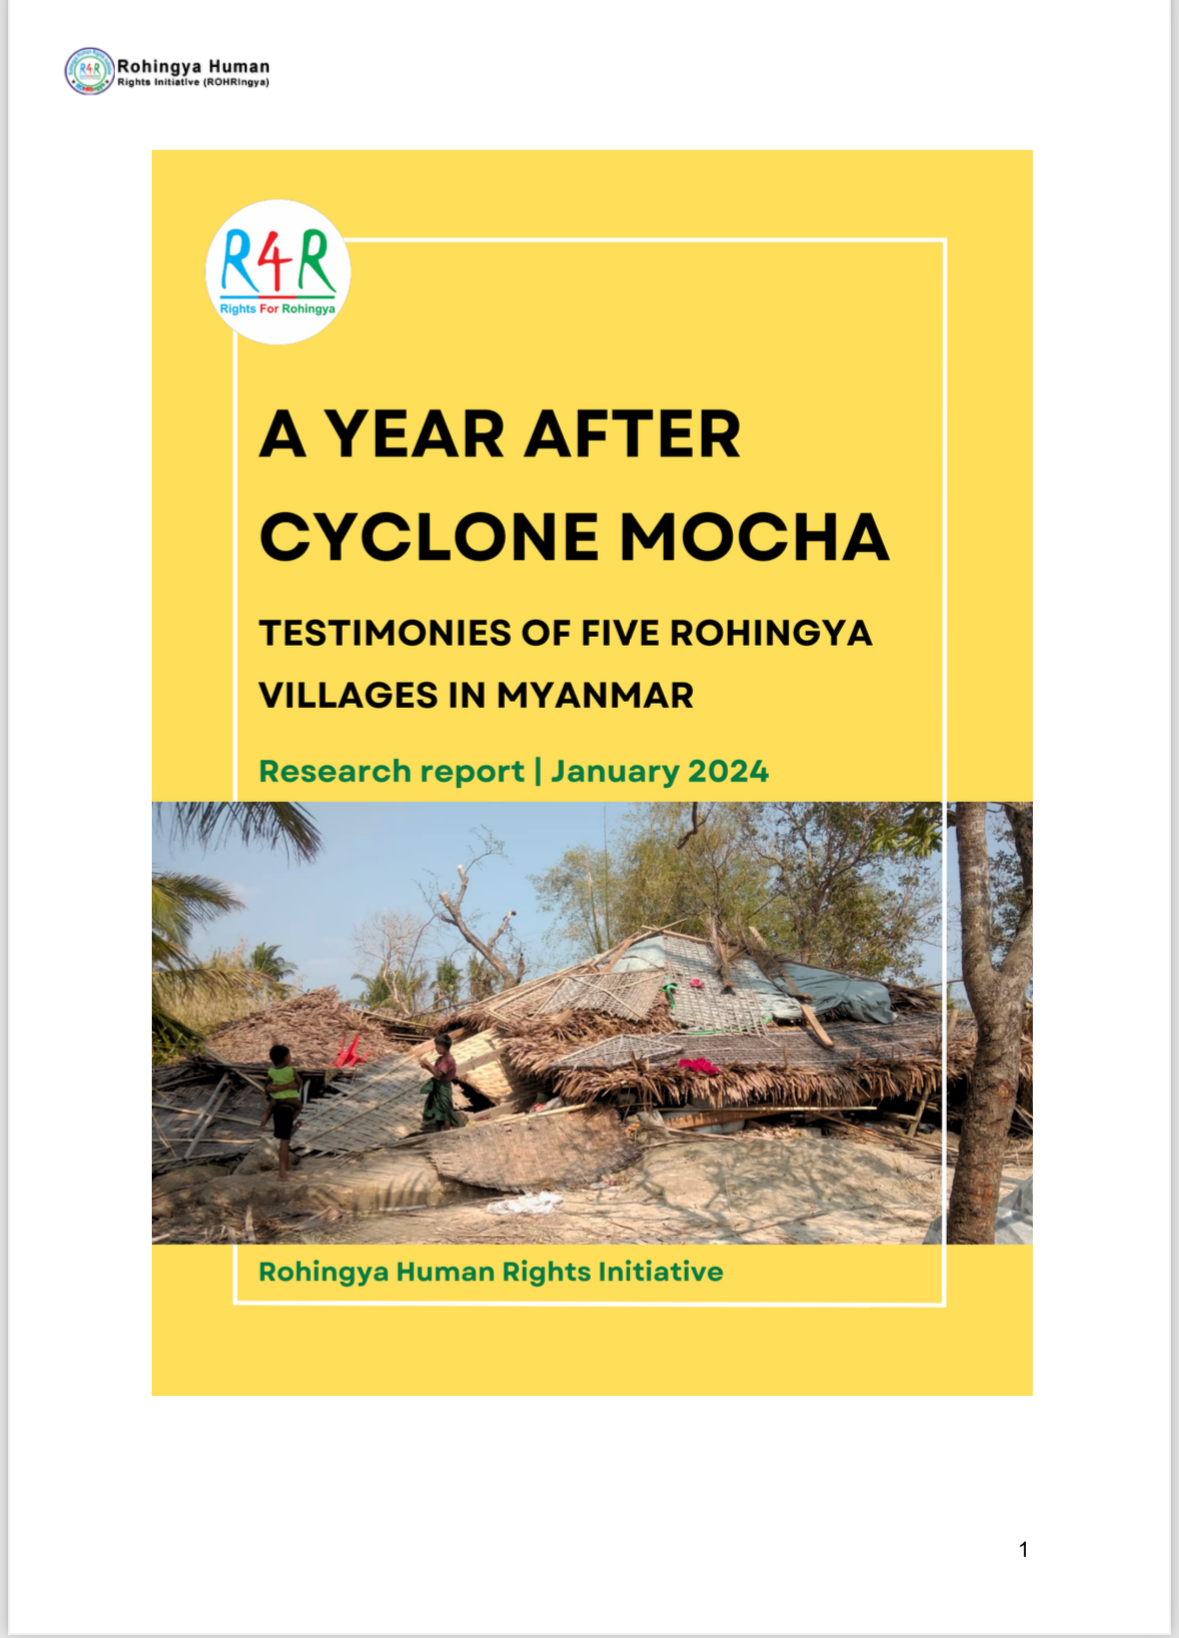 A YEAR AFTER MOCHA TESTIMONIES OF FIVE ROHINGYA VILLAGES IN MYANMAR REPORT